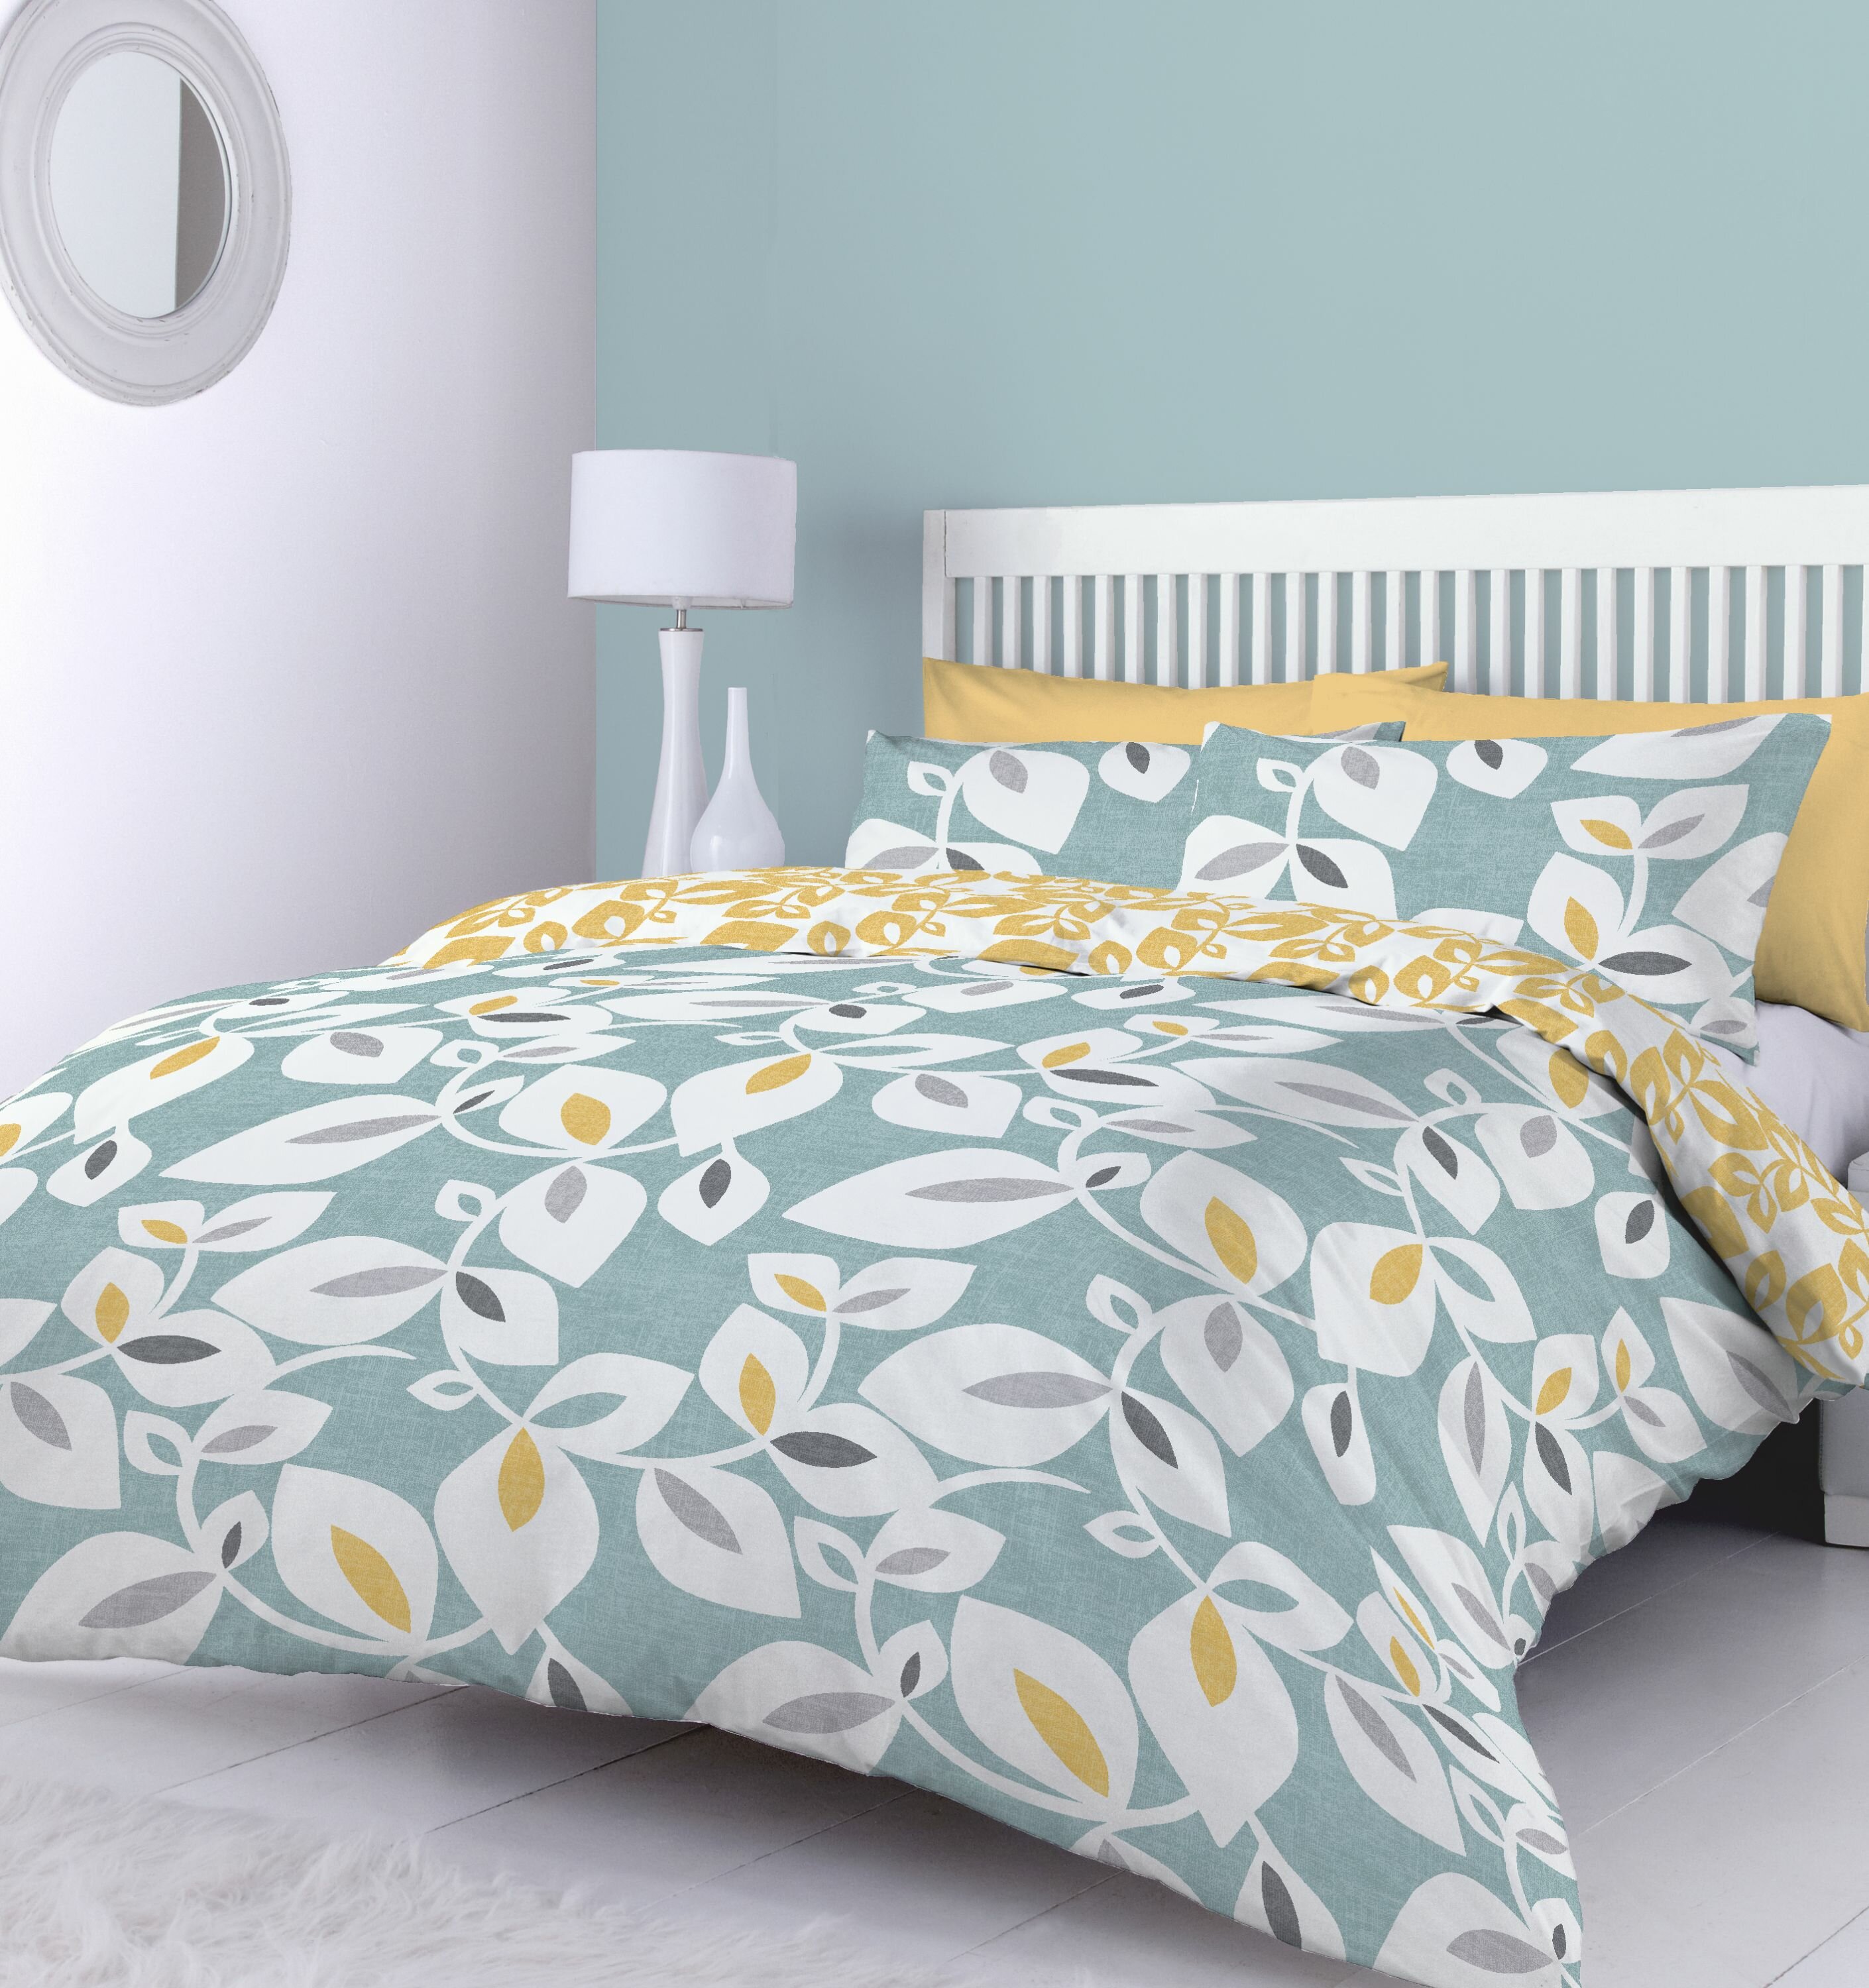 Catherine Lansfield Bedding Fresh Floral Duvet Cover Set with Pillowcase  Bright